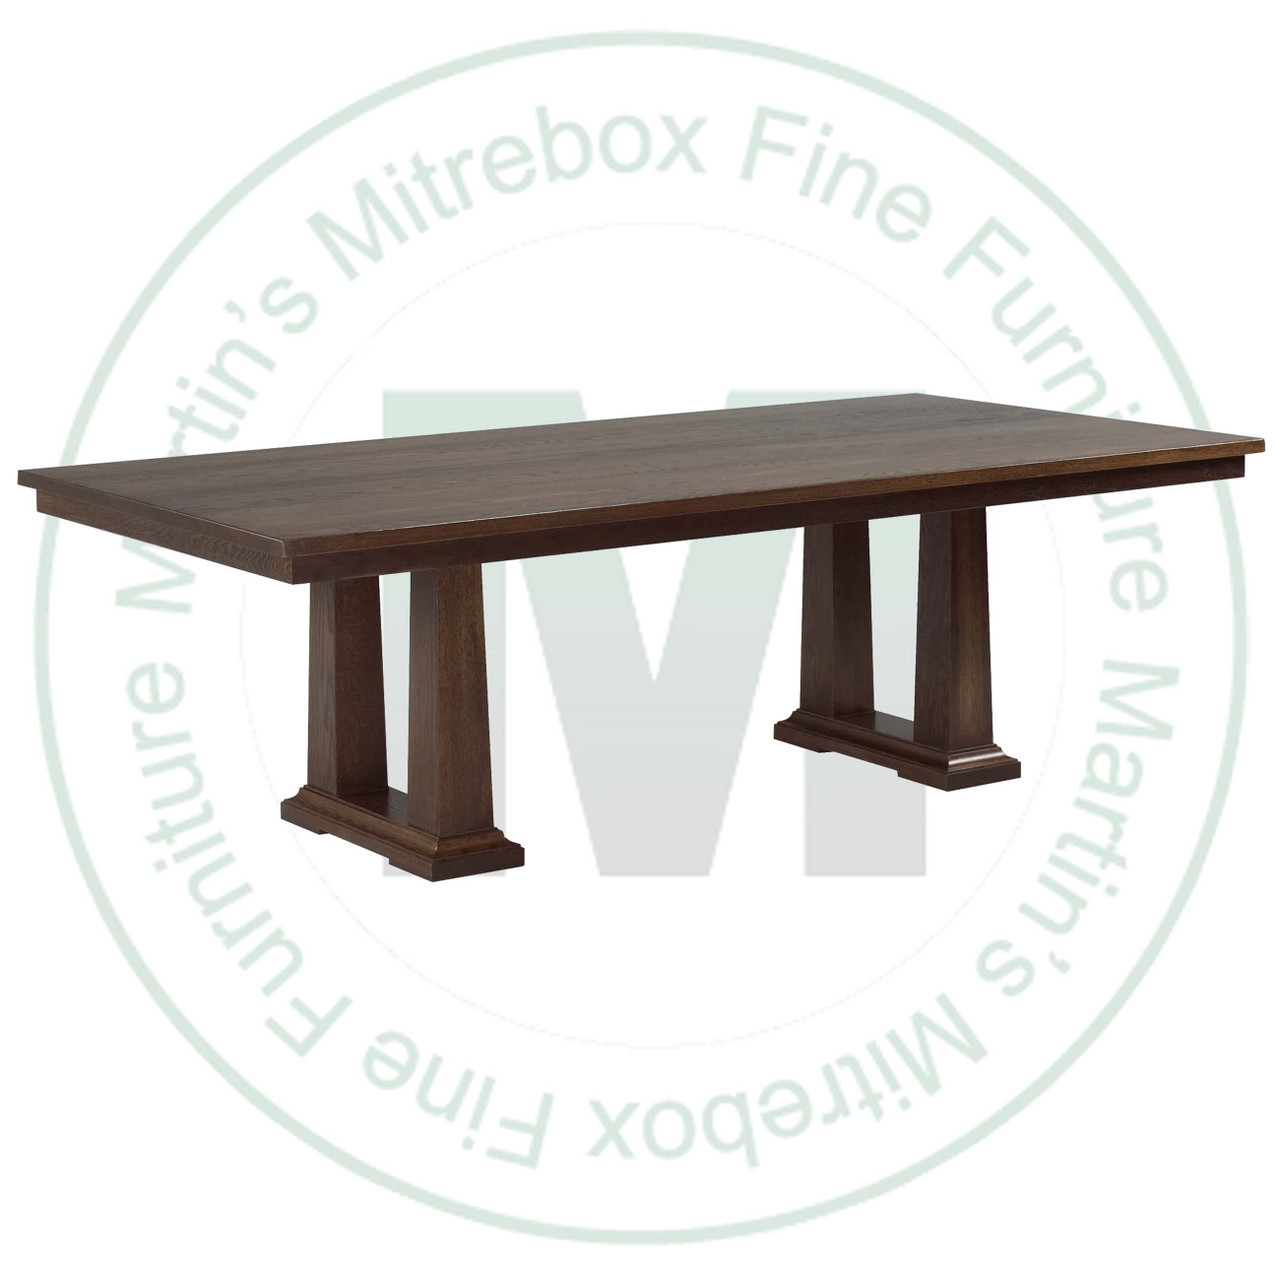 Maple Acropolis Solid Top Double Pedestal Table 54''D x 120''W x 30''H Table Has 1.25'' Thick Top